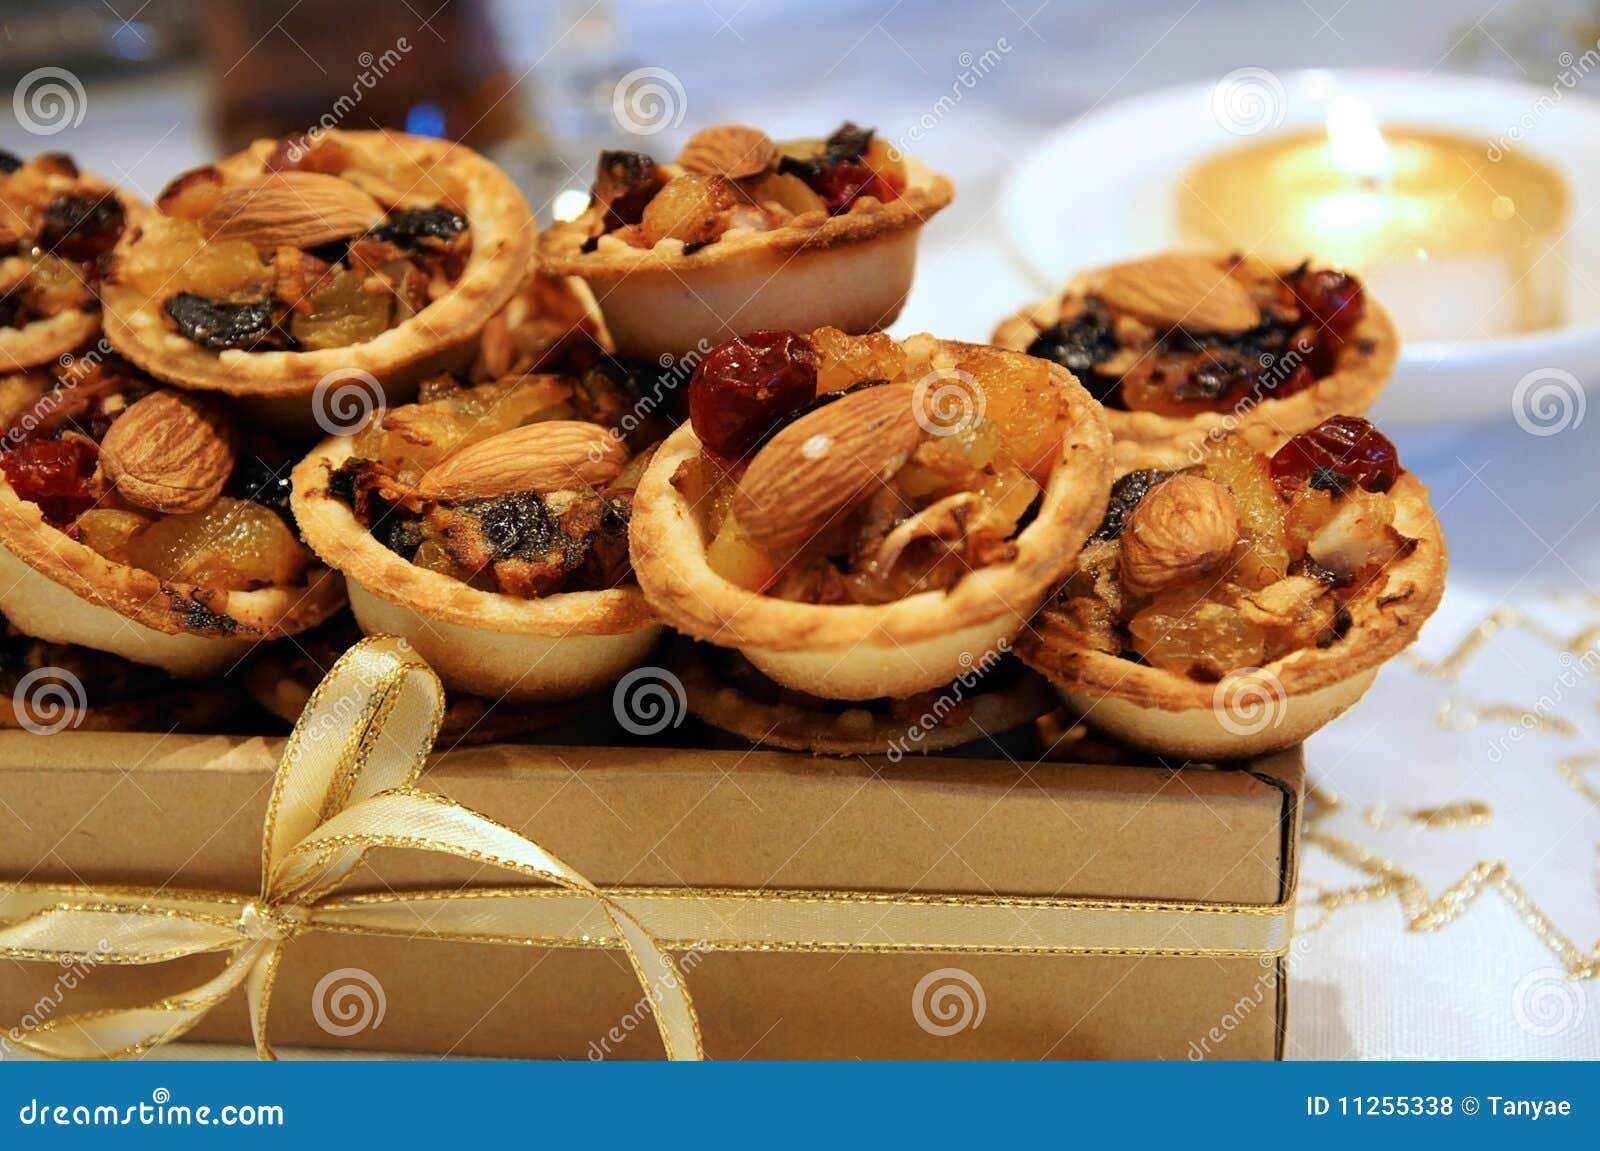 christmas mince pies in a gift box